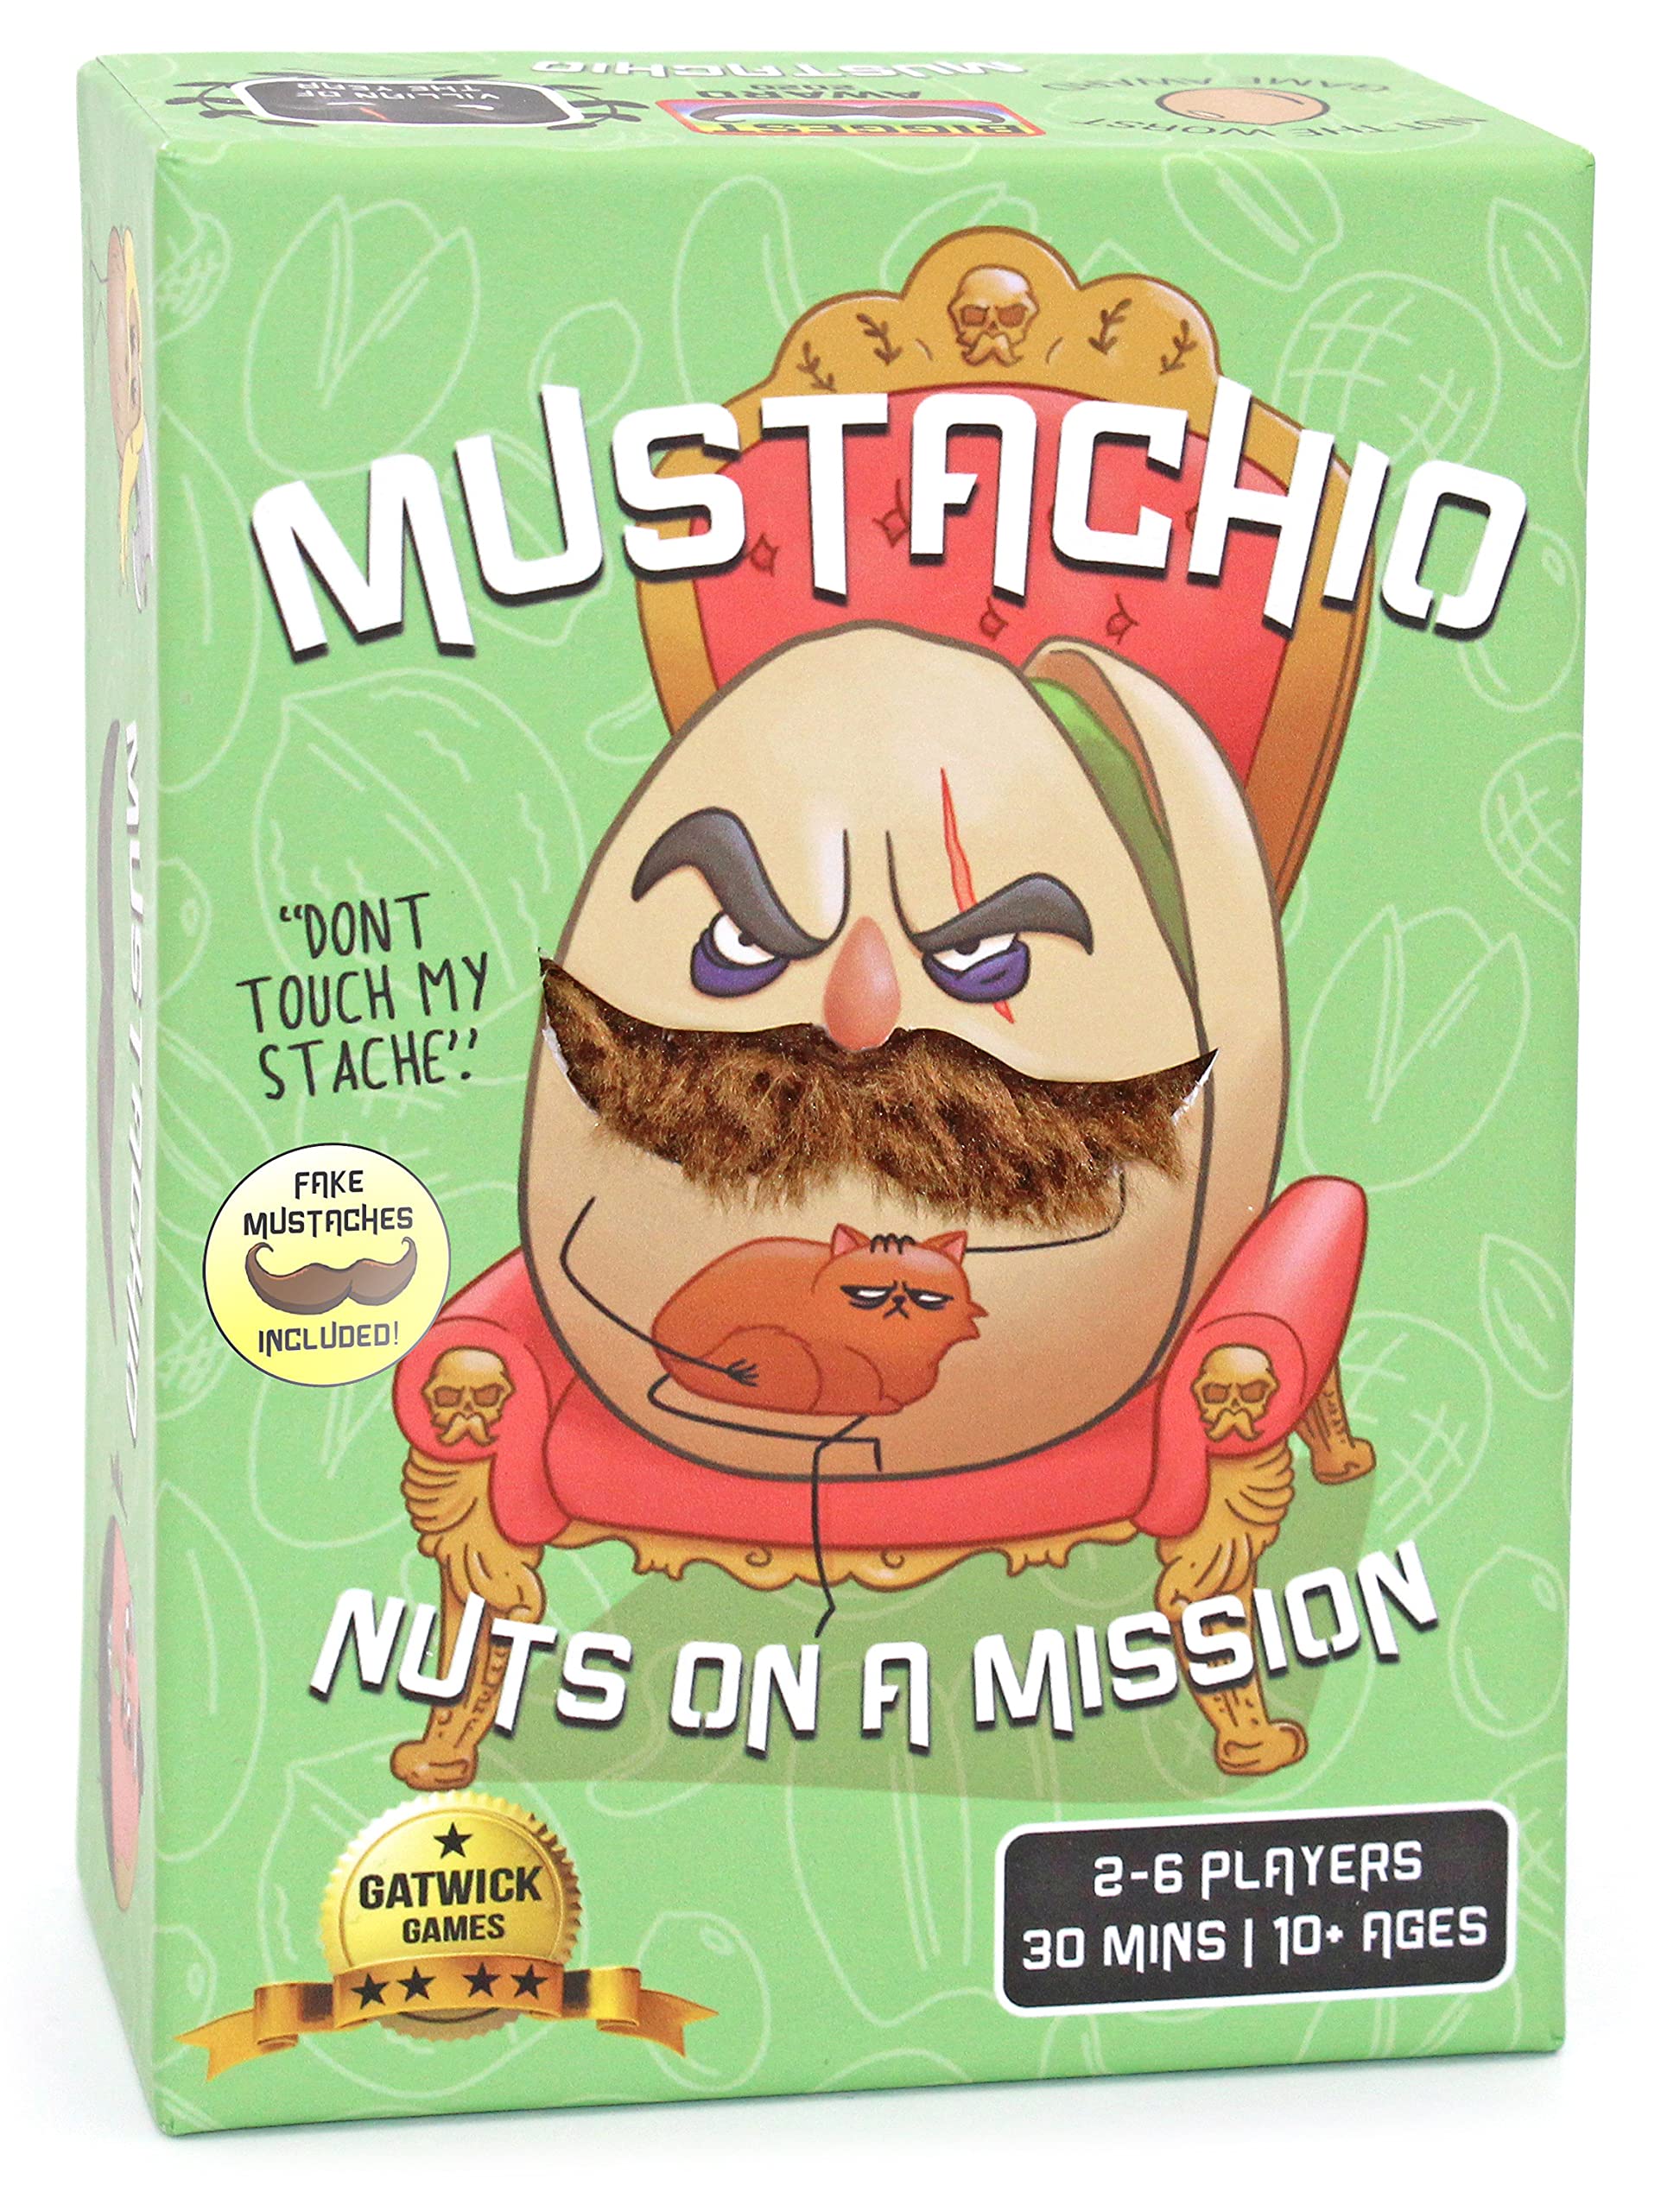 Gatwick Games Mustachio by gatwick games  Mustaches Now Included  A Strategy game of Trickery & Scheming Nuts Funny Board games for Teens and 